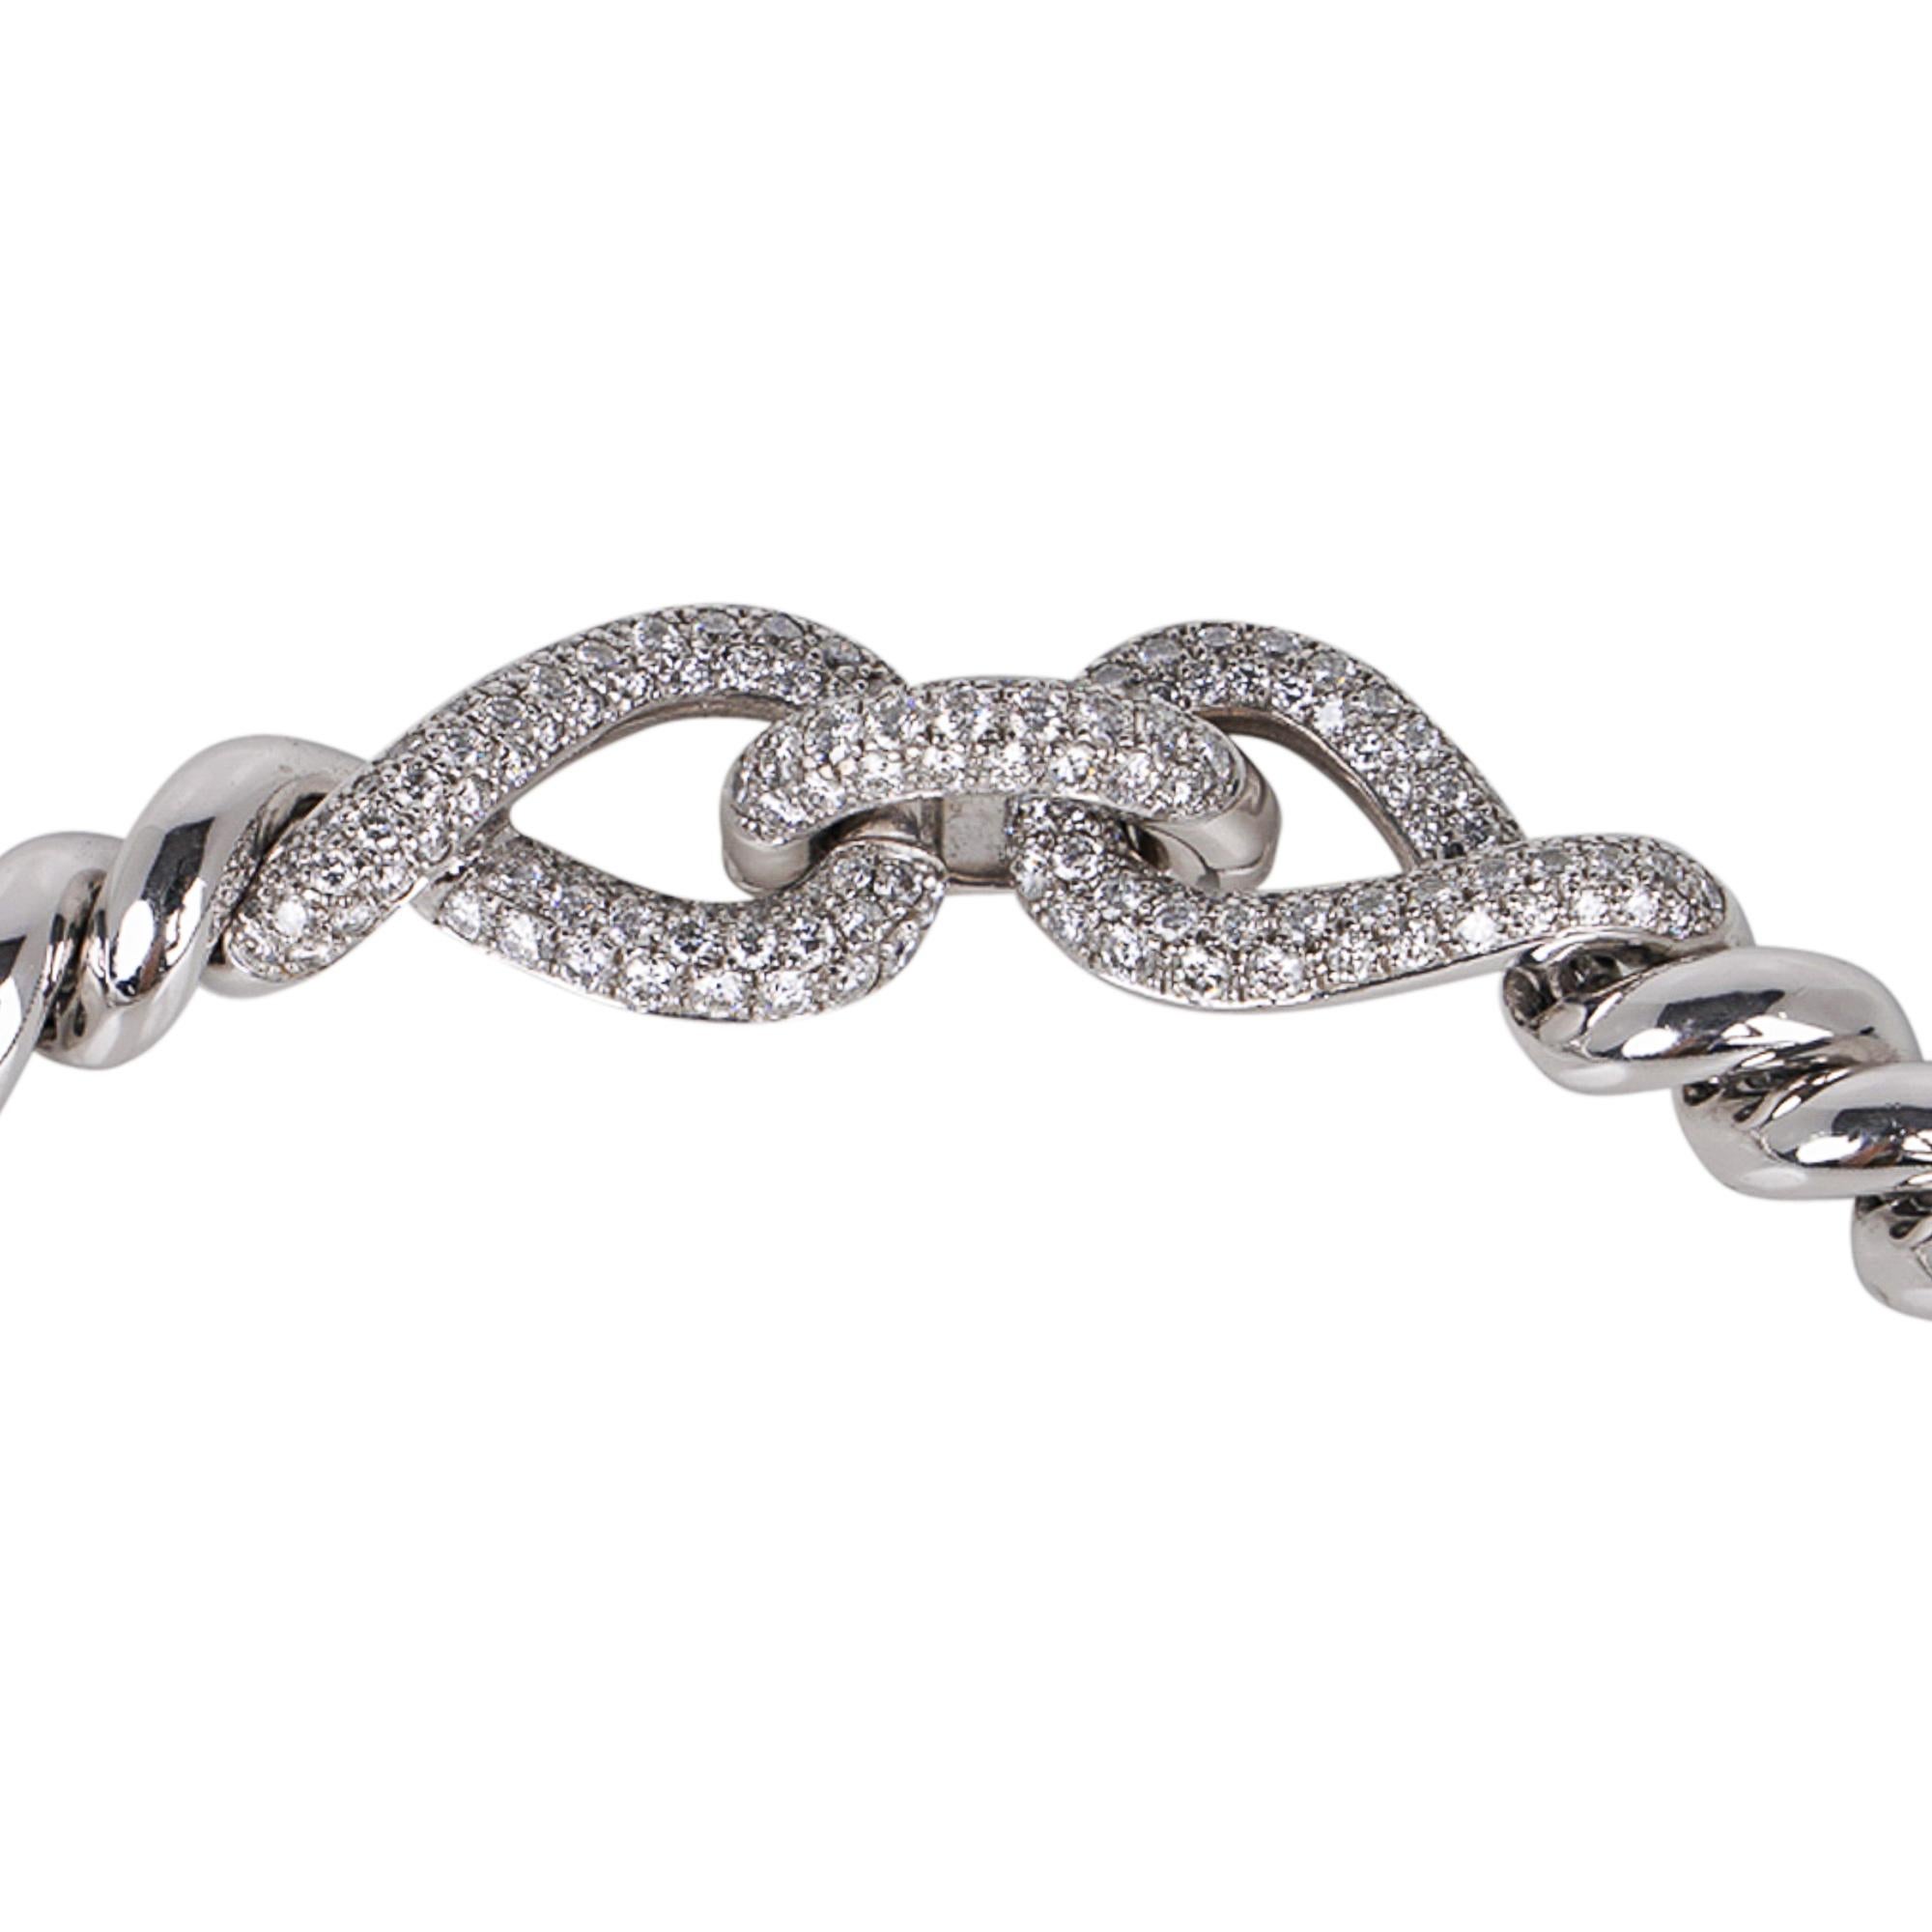 Mightychic offers a rare and highly collectible Hermes Torsade diamond necklace.
This Hermes choker style $65,000.00 necklace is featured in 18K high polish substantial white gold.
5.30 Carats of brilliant cut diamonds.
Closure is the fold over in